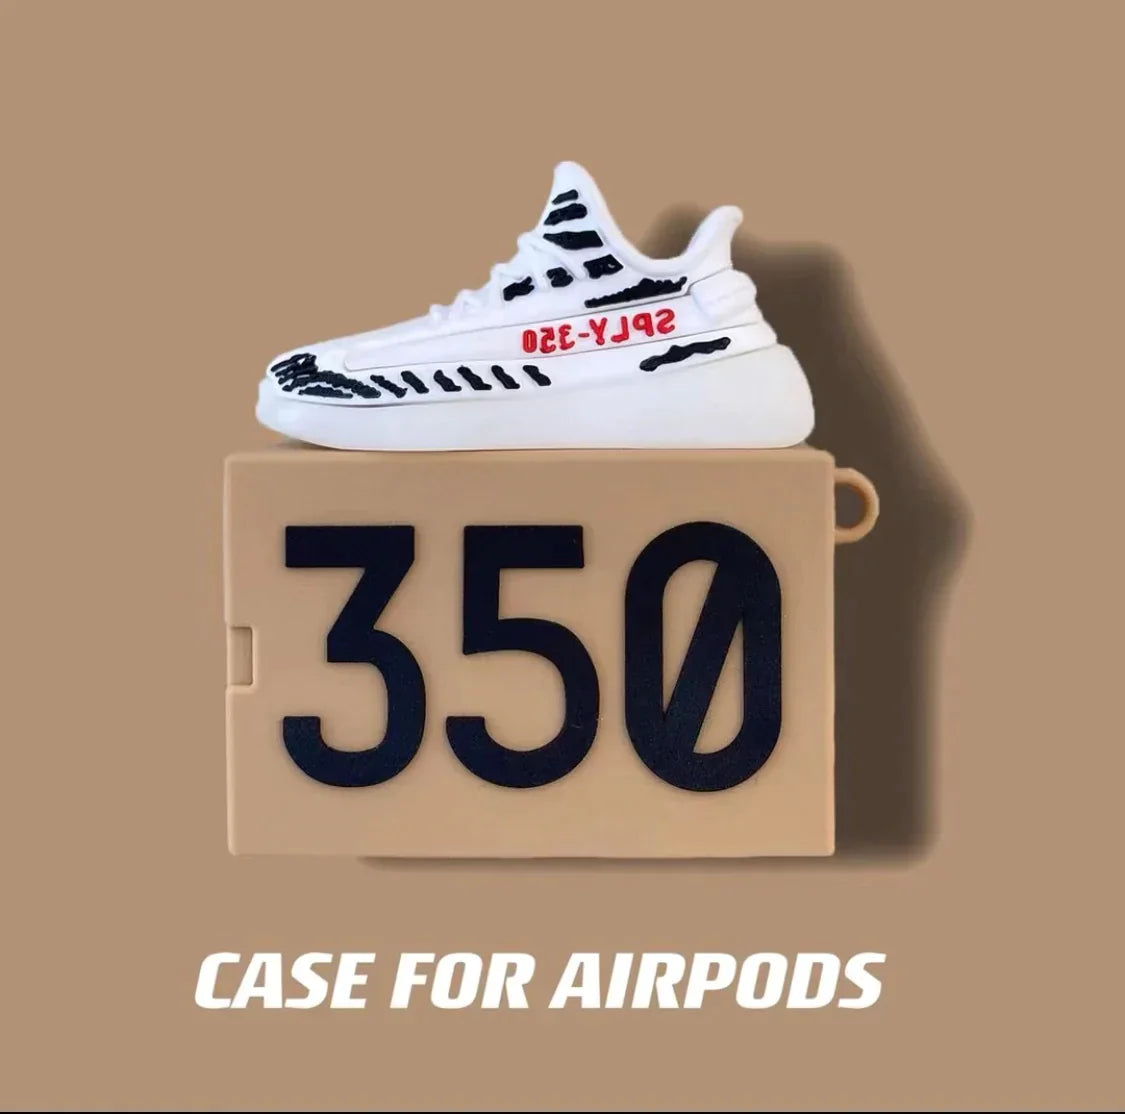 Yeezy Boost 350 AirPods Cases